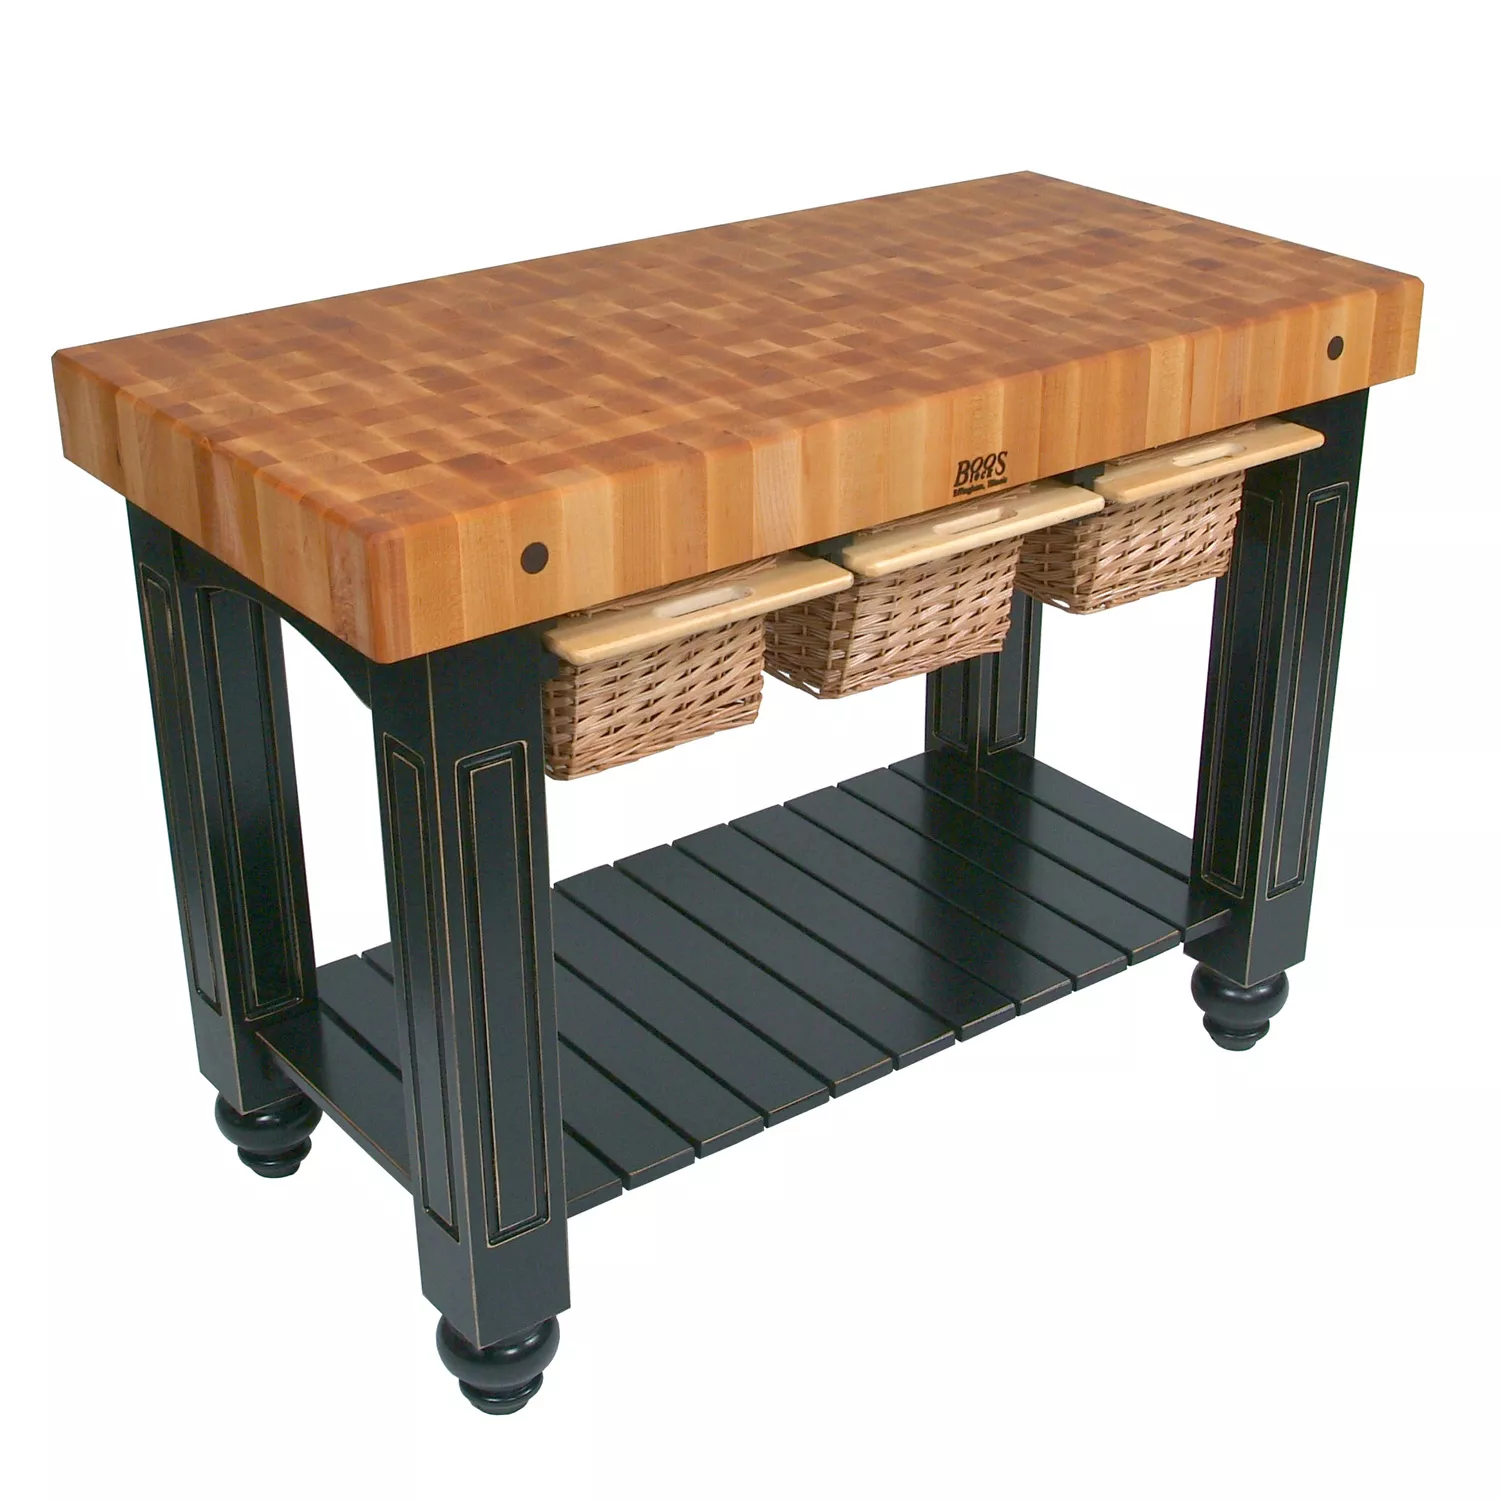 John Boos Maple End Grain 4" Thick Gathering Butcher Block Table with 3 Baskets, 48"x24"x36"